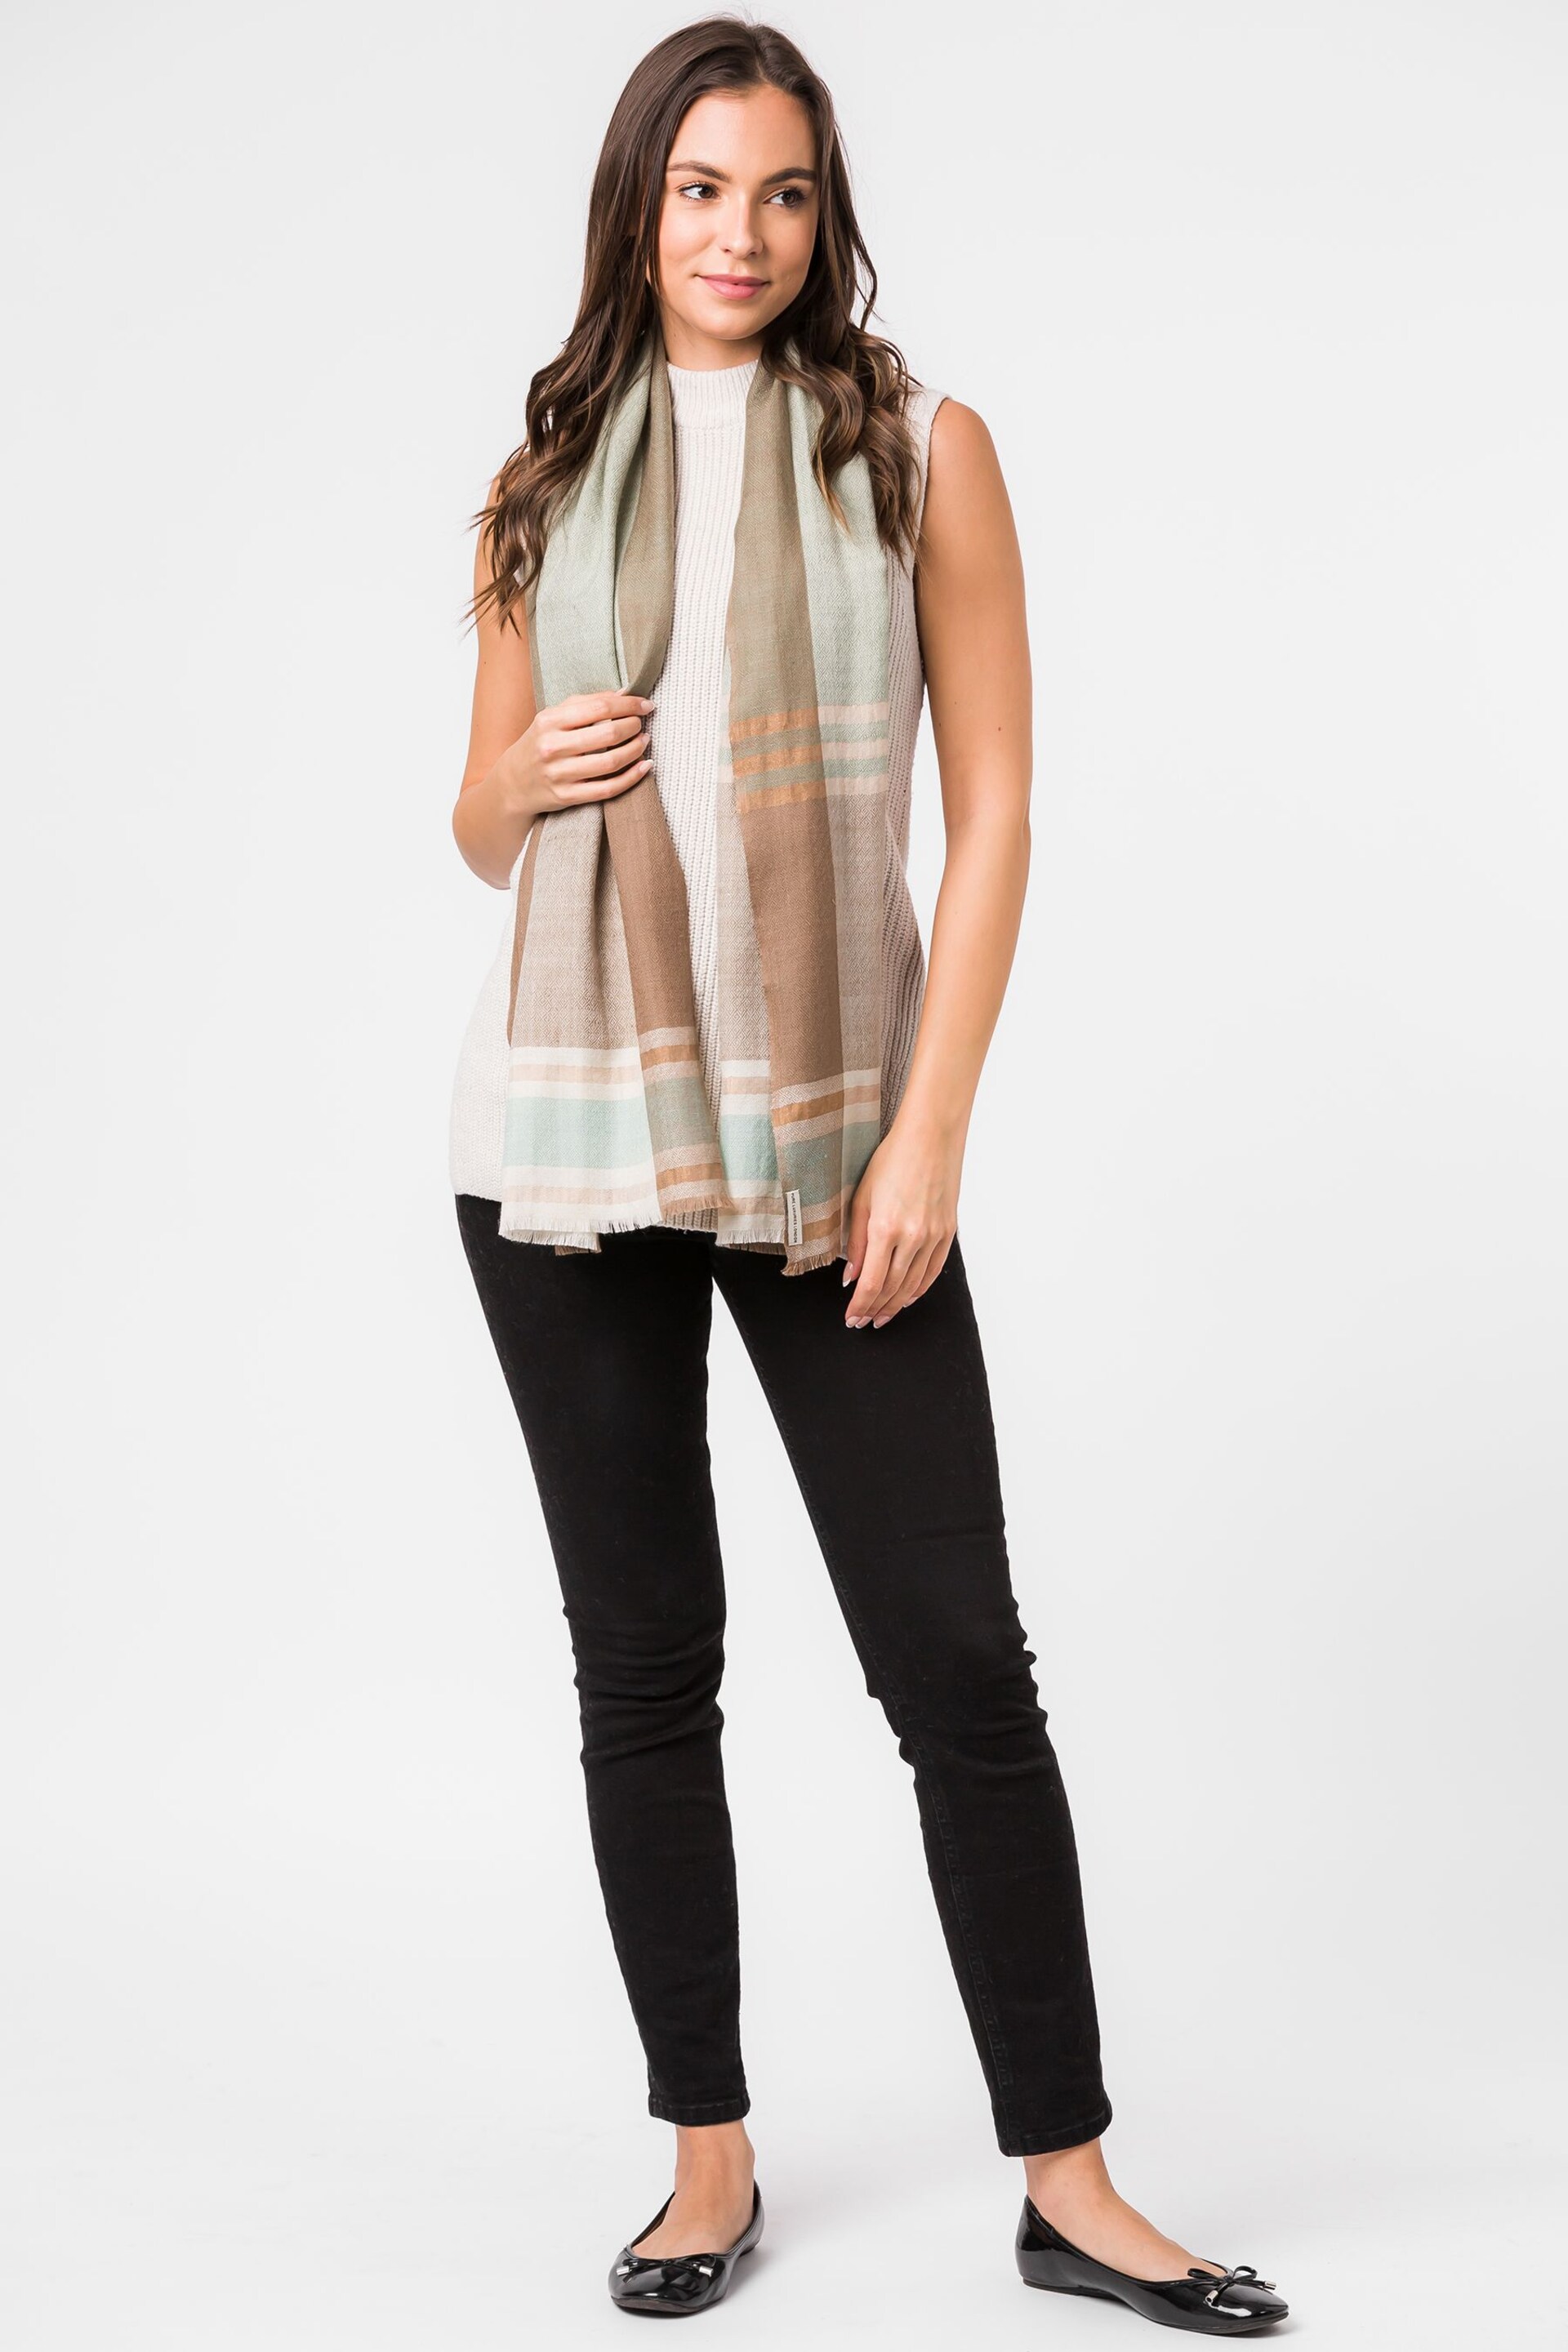 Pure Luxuries London Brown Asteris Cashmere & Merino Wool Scarf - Image 3 of 4